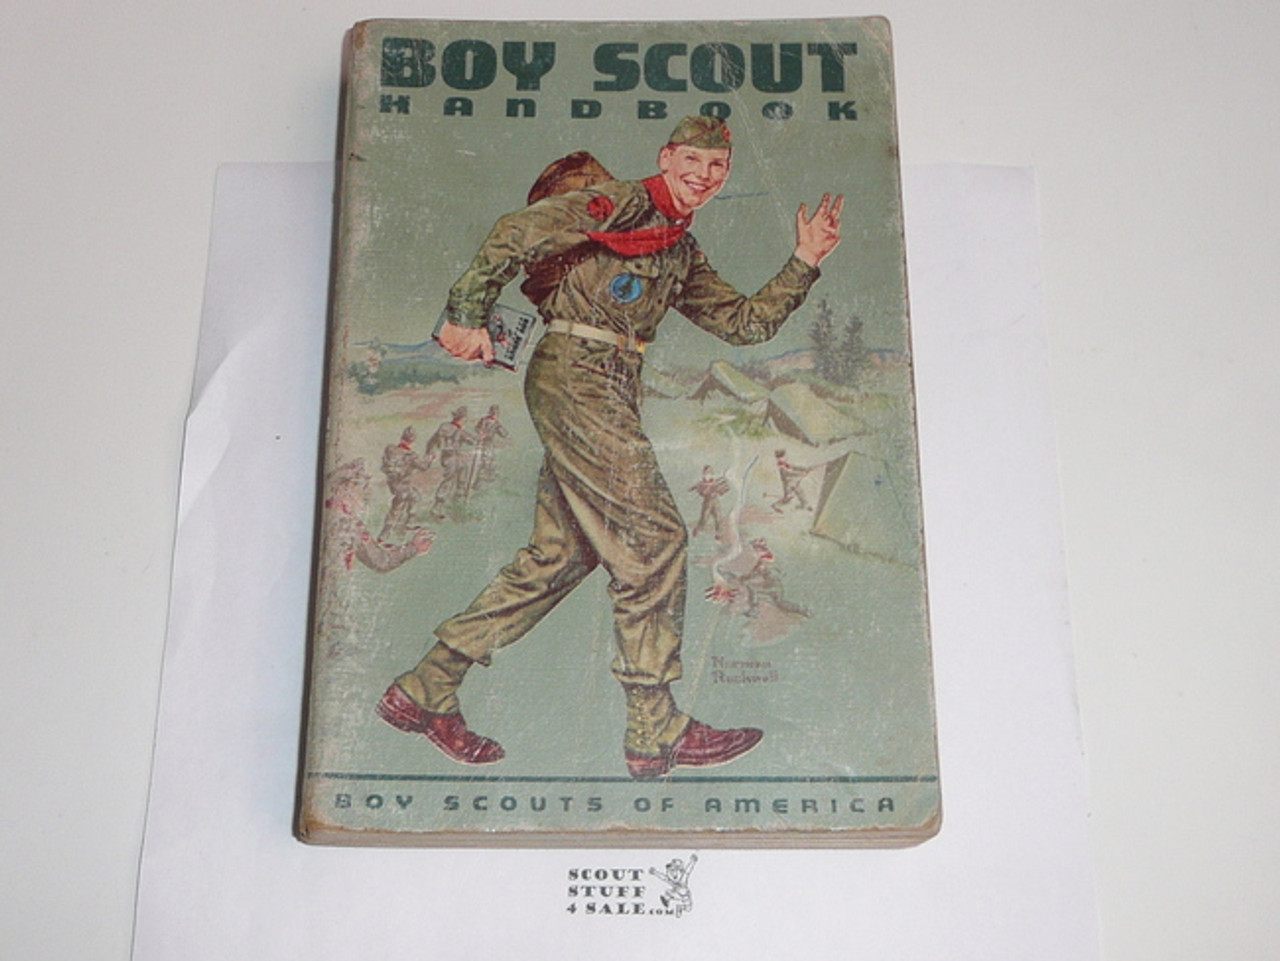 1964 Boy Scout Handbook, Sixth Edition, Sixth Printing, Used condition, Norman Rockwell Cover